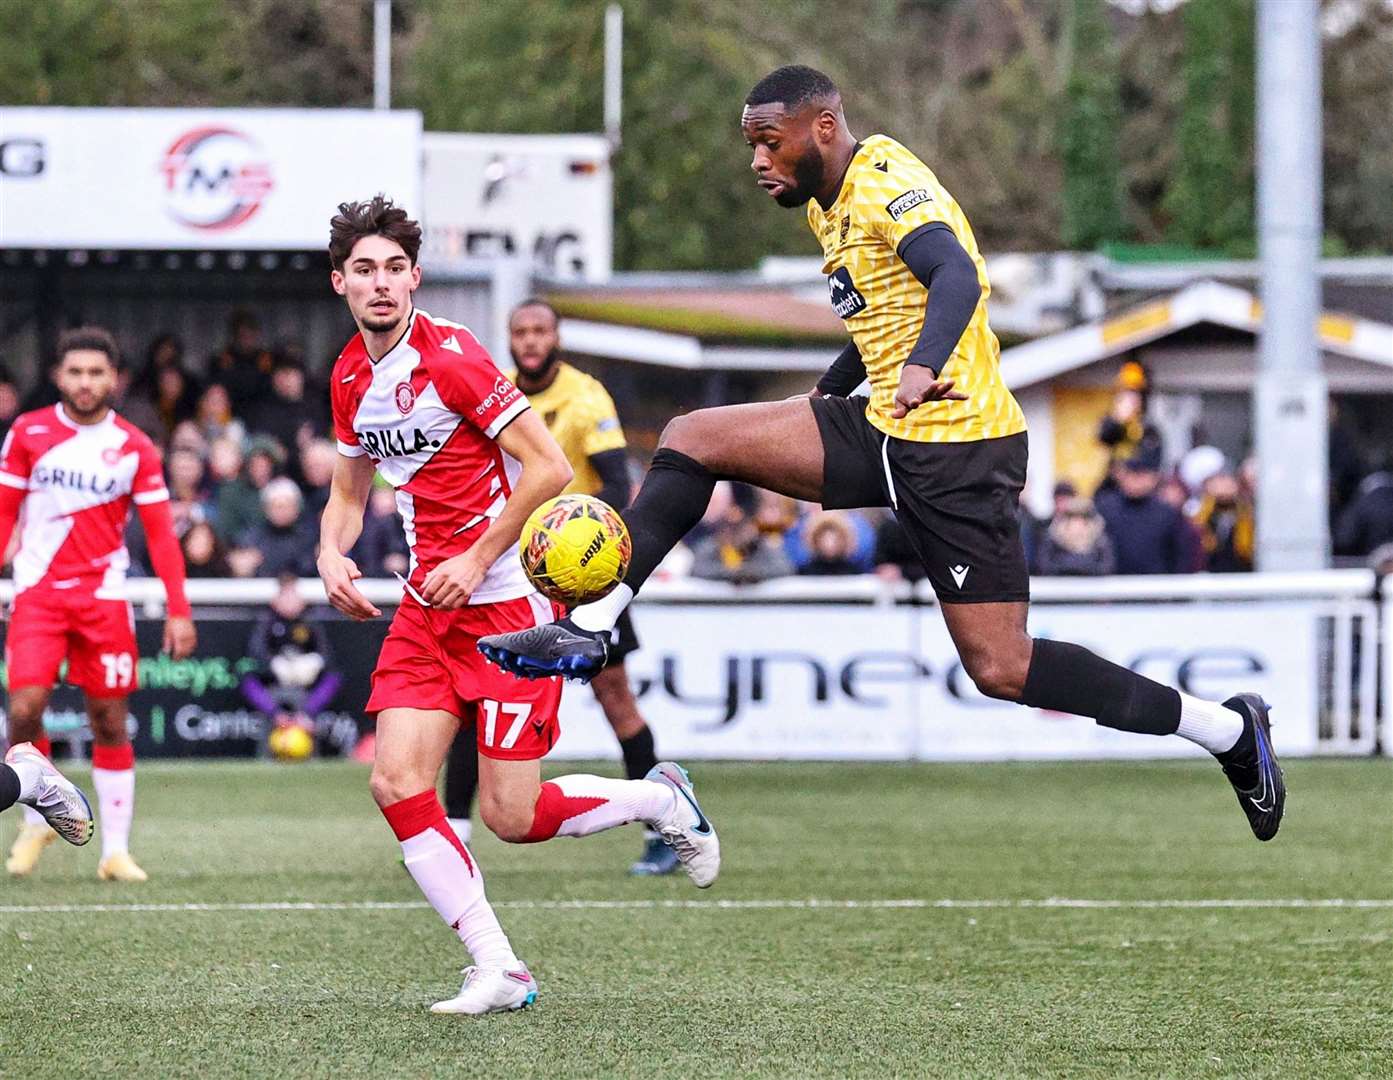 Paul Appiah in possession for Maidstone against Stevenage. Picture: Helen Cooper